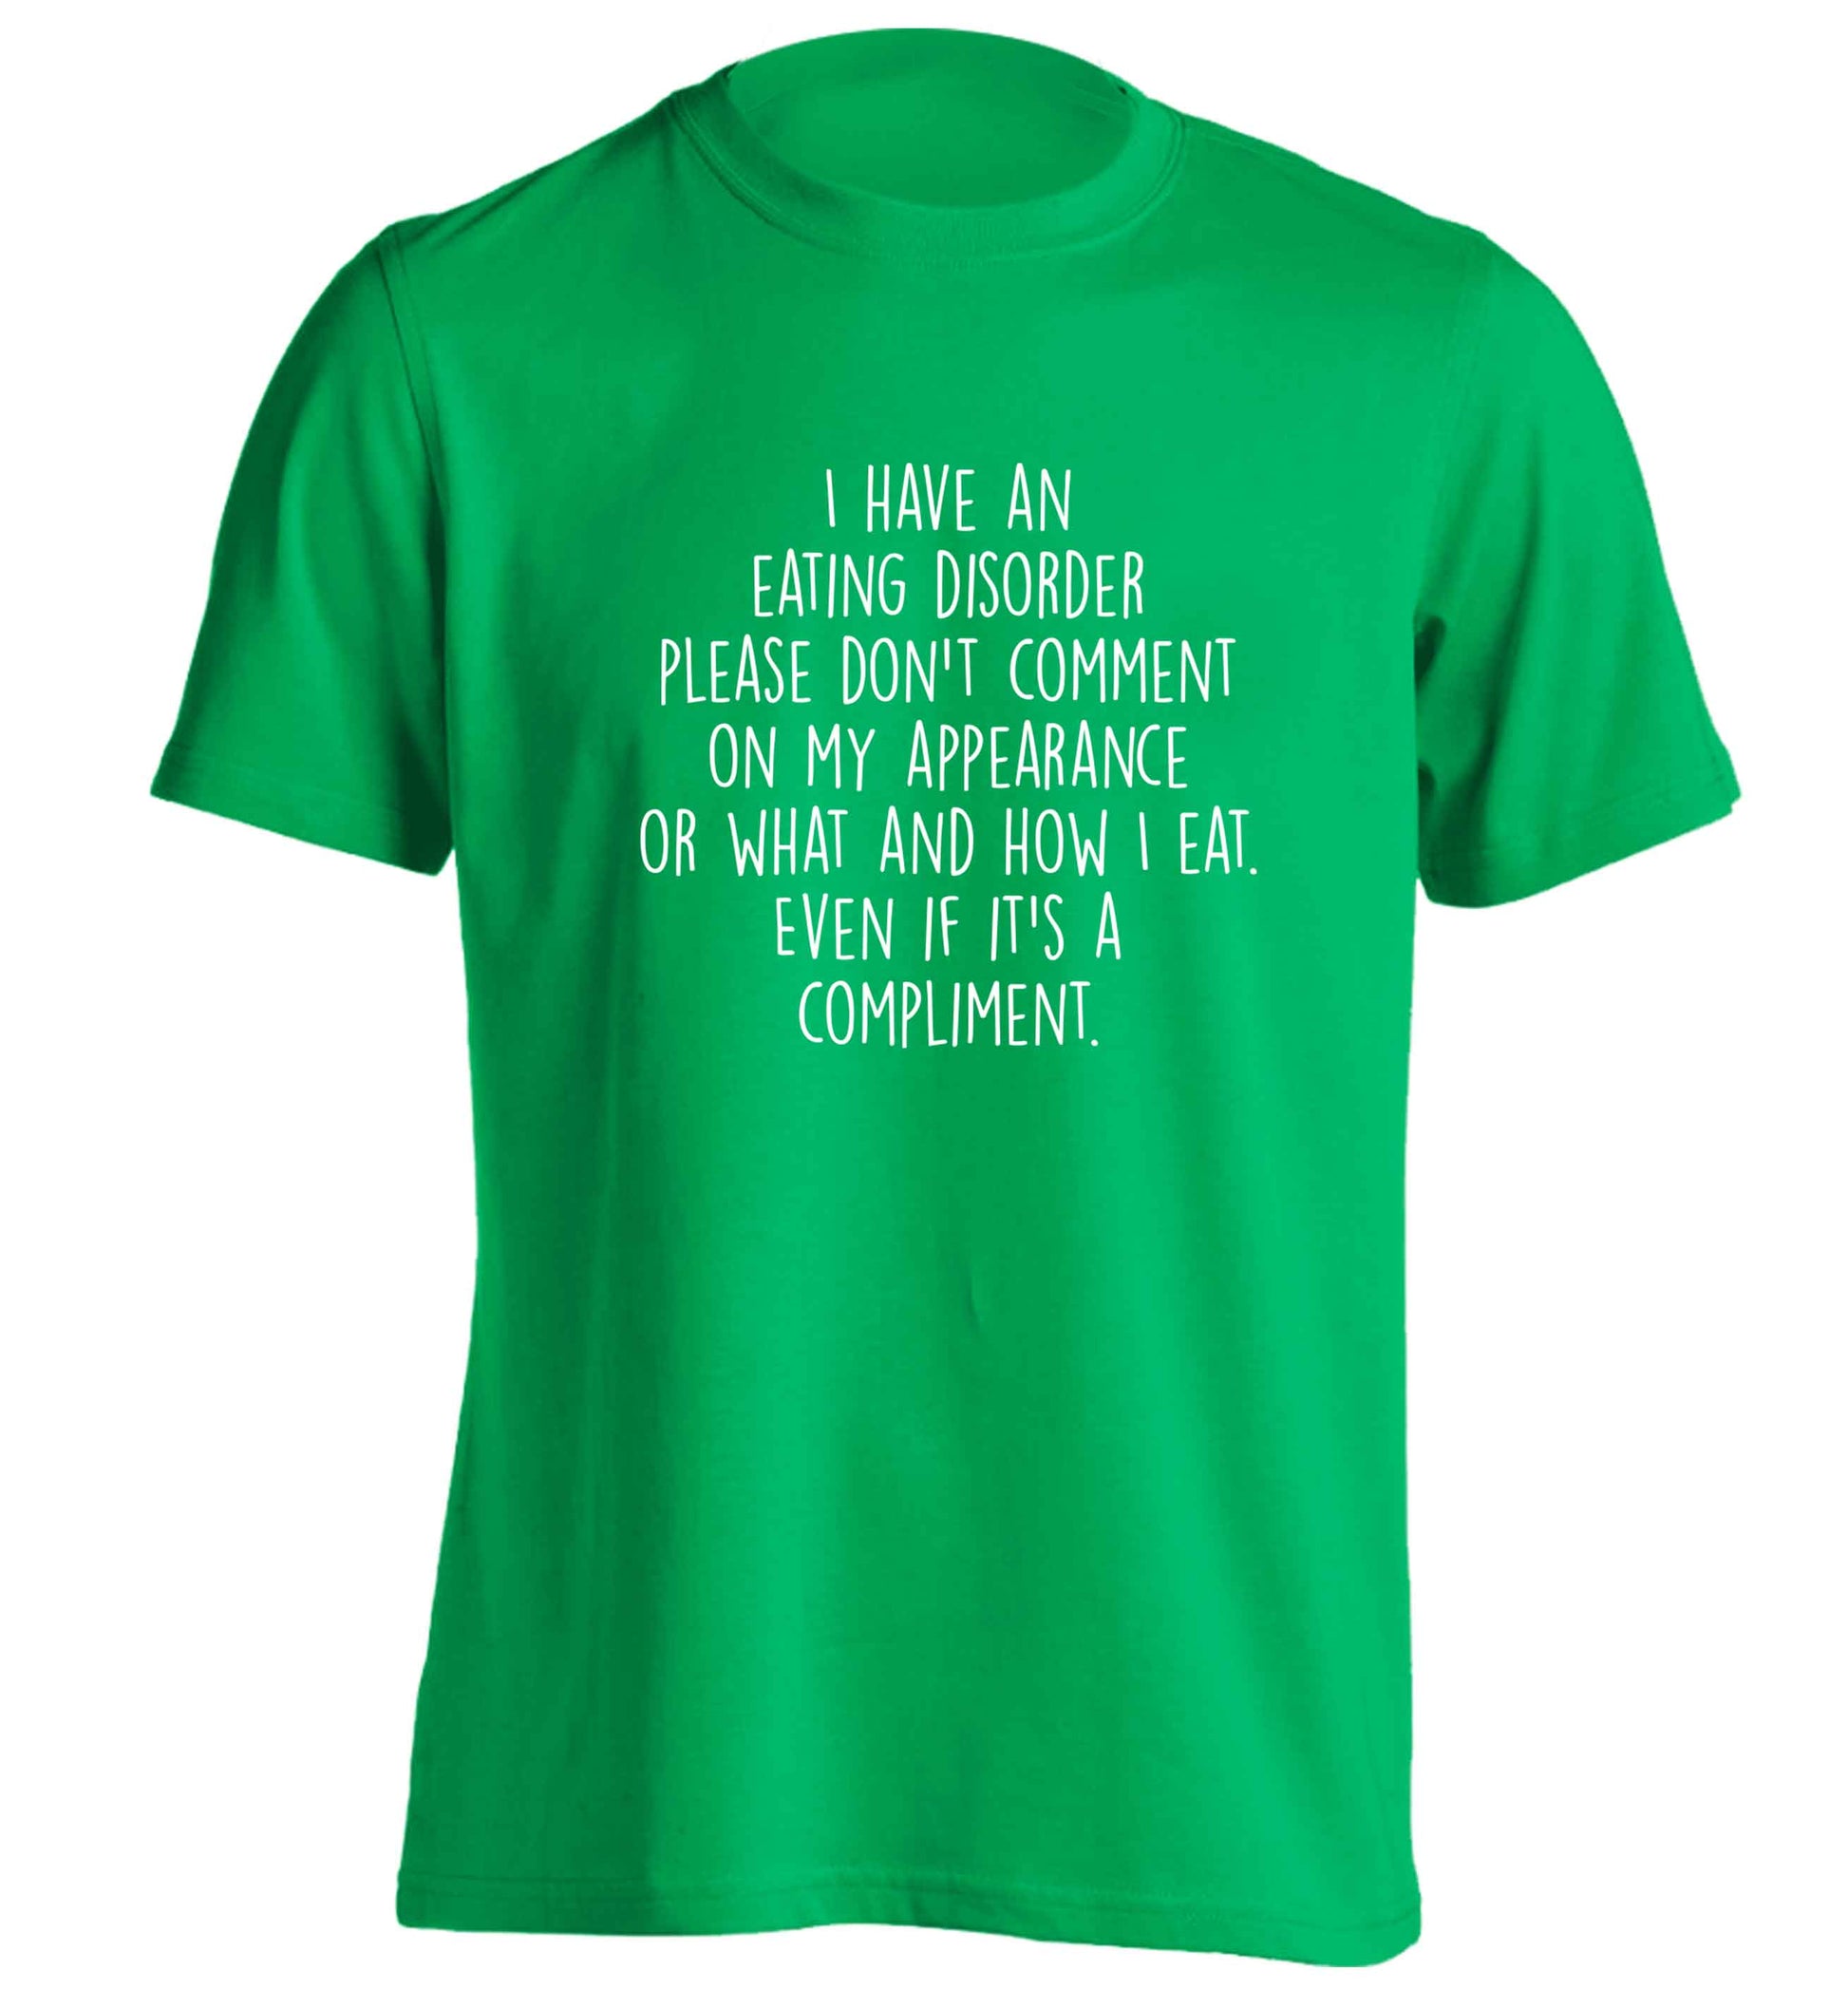 I have an eating disorder please don't comment on my appearance or what and how I eat. Even if it's a compliment adults unisex green Tshirt 2XL